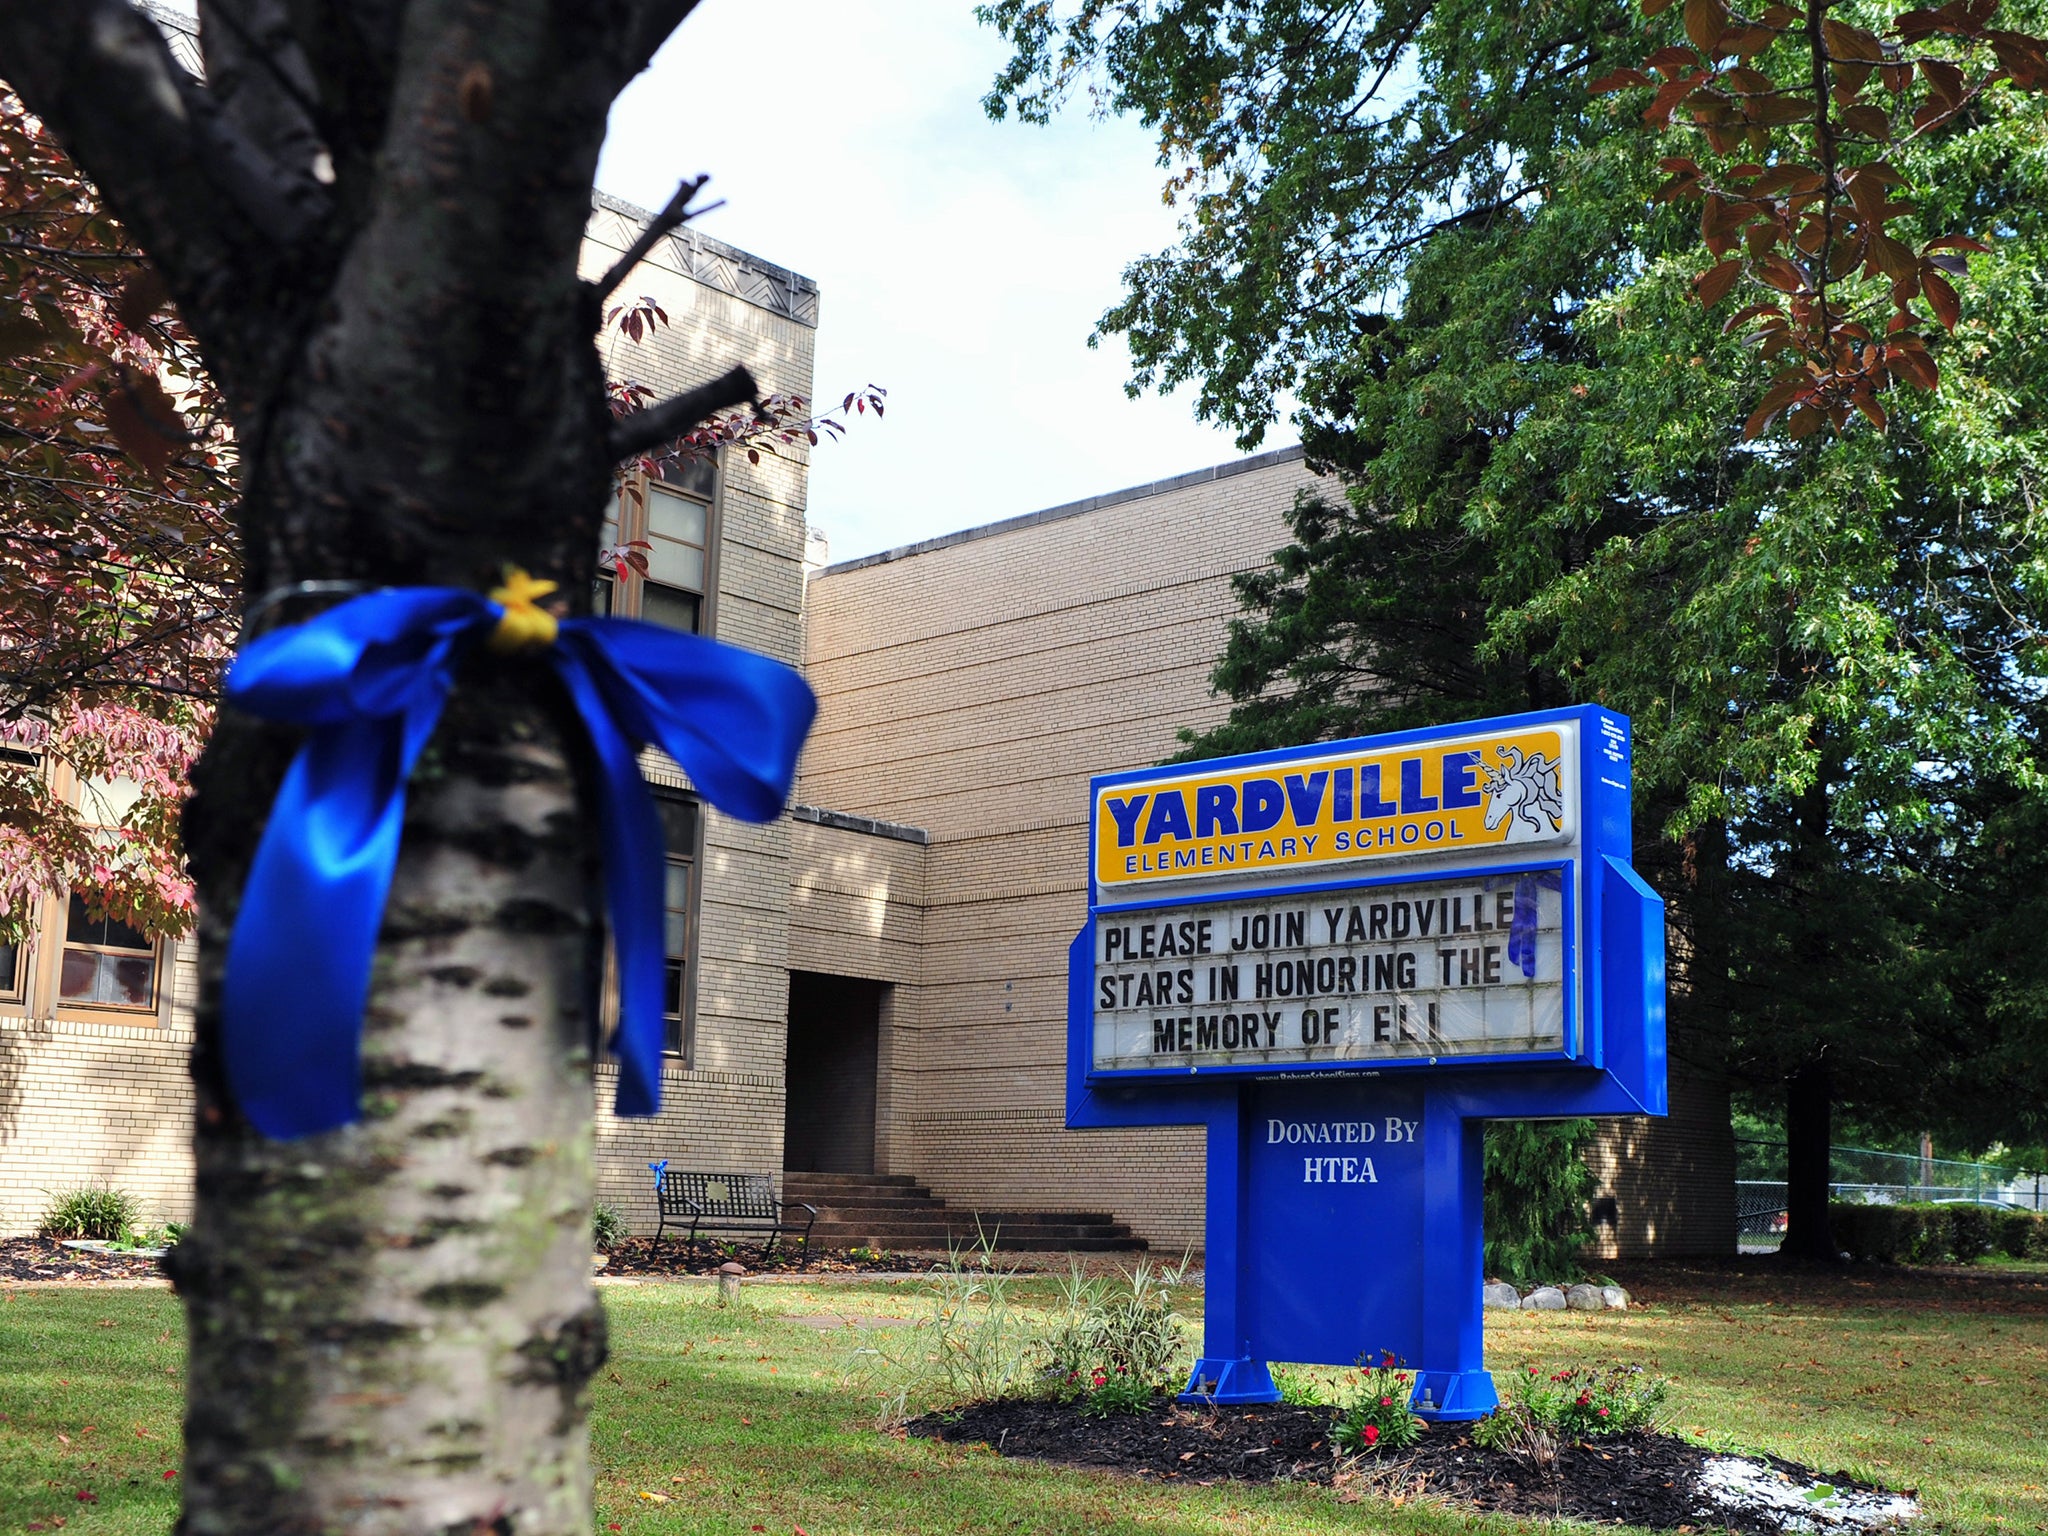 A blue and gold ribbon wrap around a tree in front of Yardville Elementary School in Hamilton Township. The ribbon and sign honored the memory of a preschooler who died on 25 September of enterovirus 68